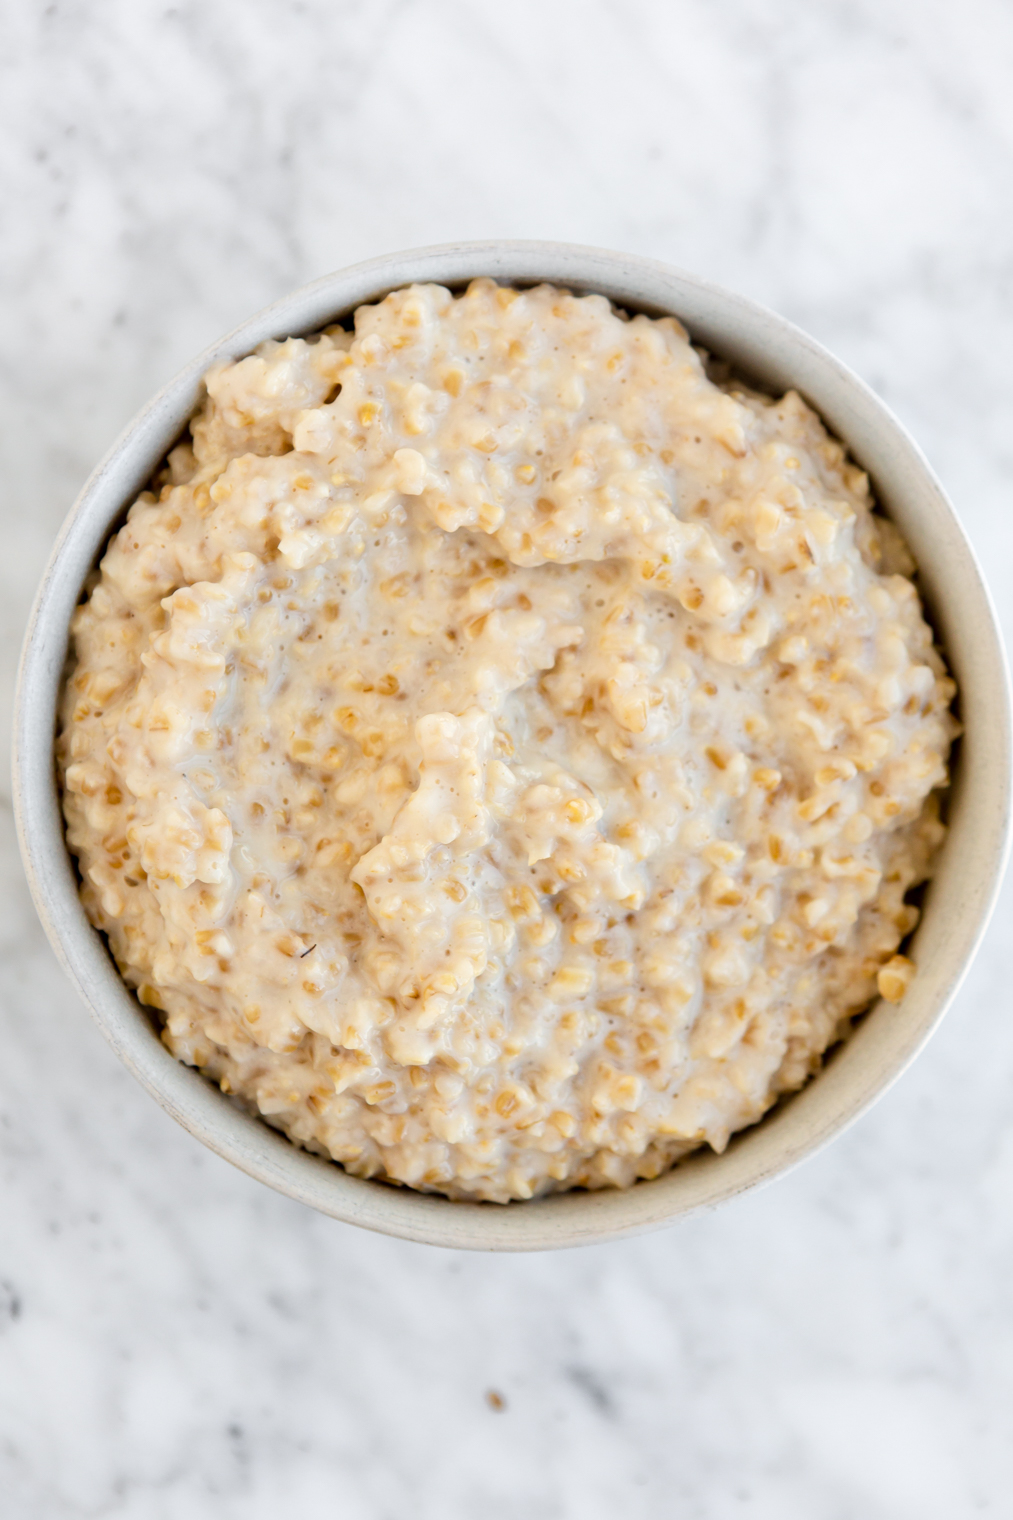 Top down view of bowl with creamy steel cut oats.